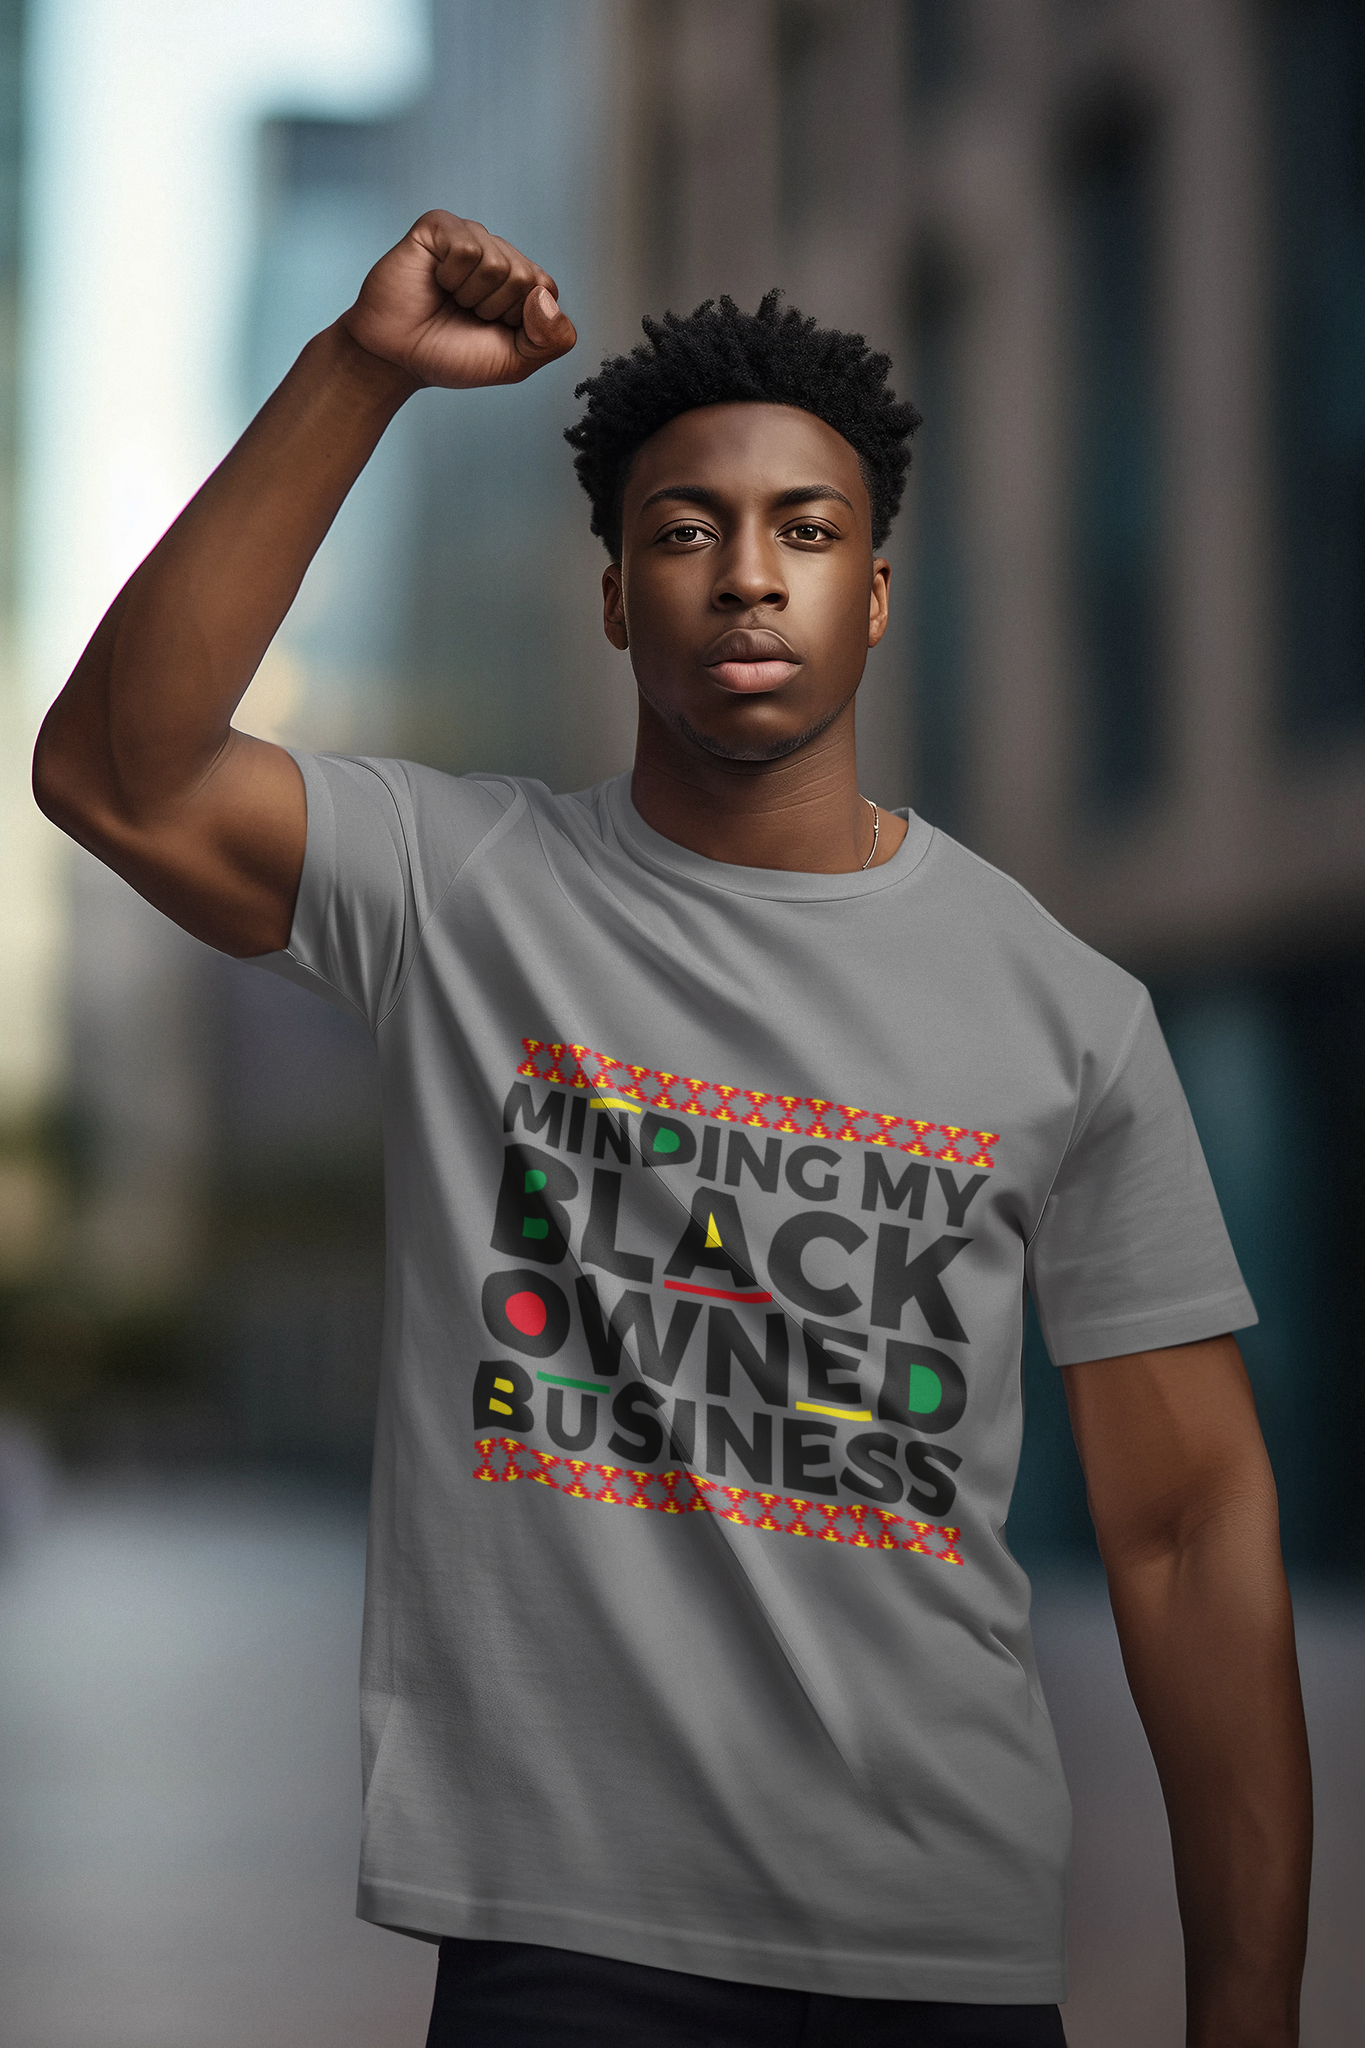 Black-Owned Business Round-Up